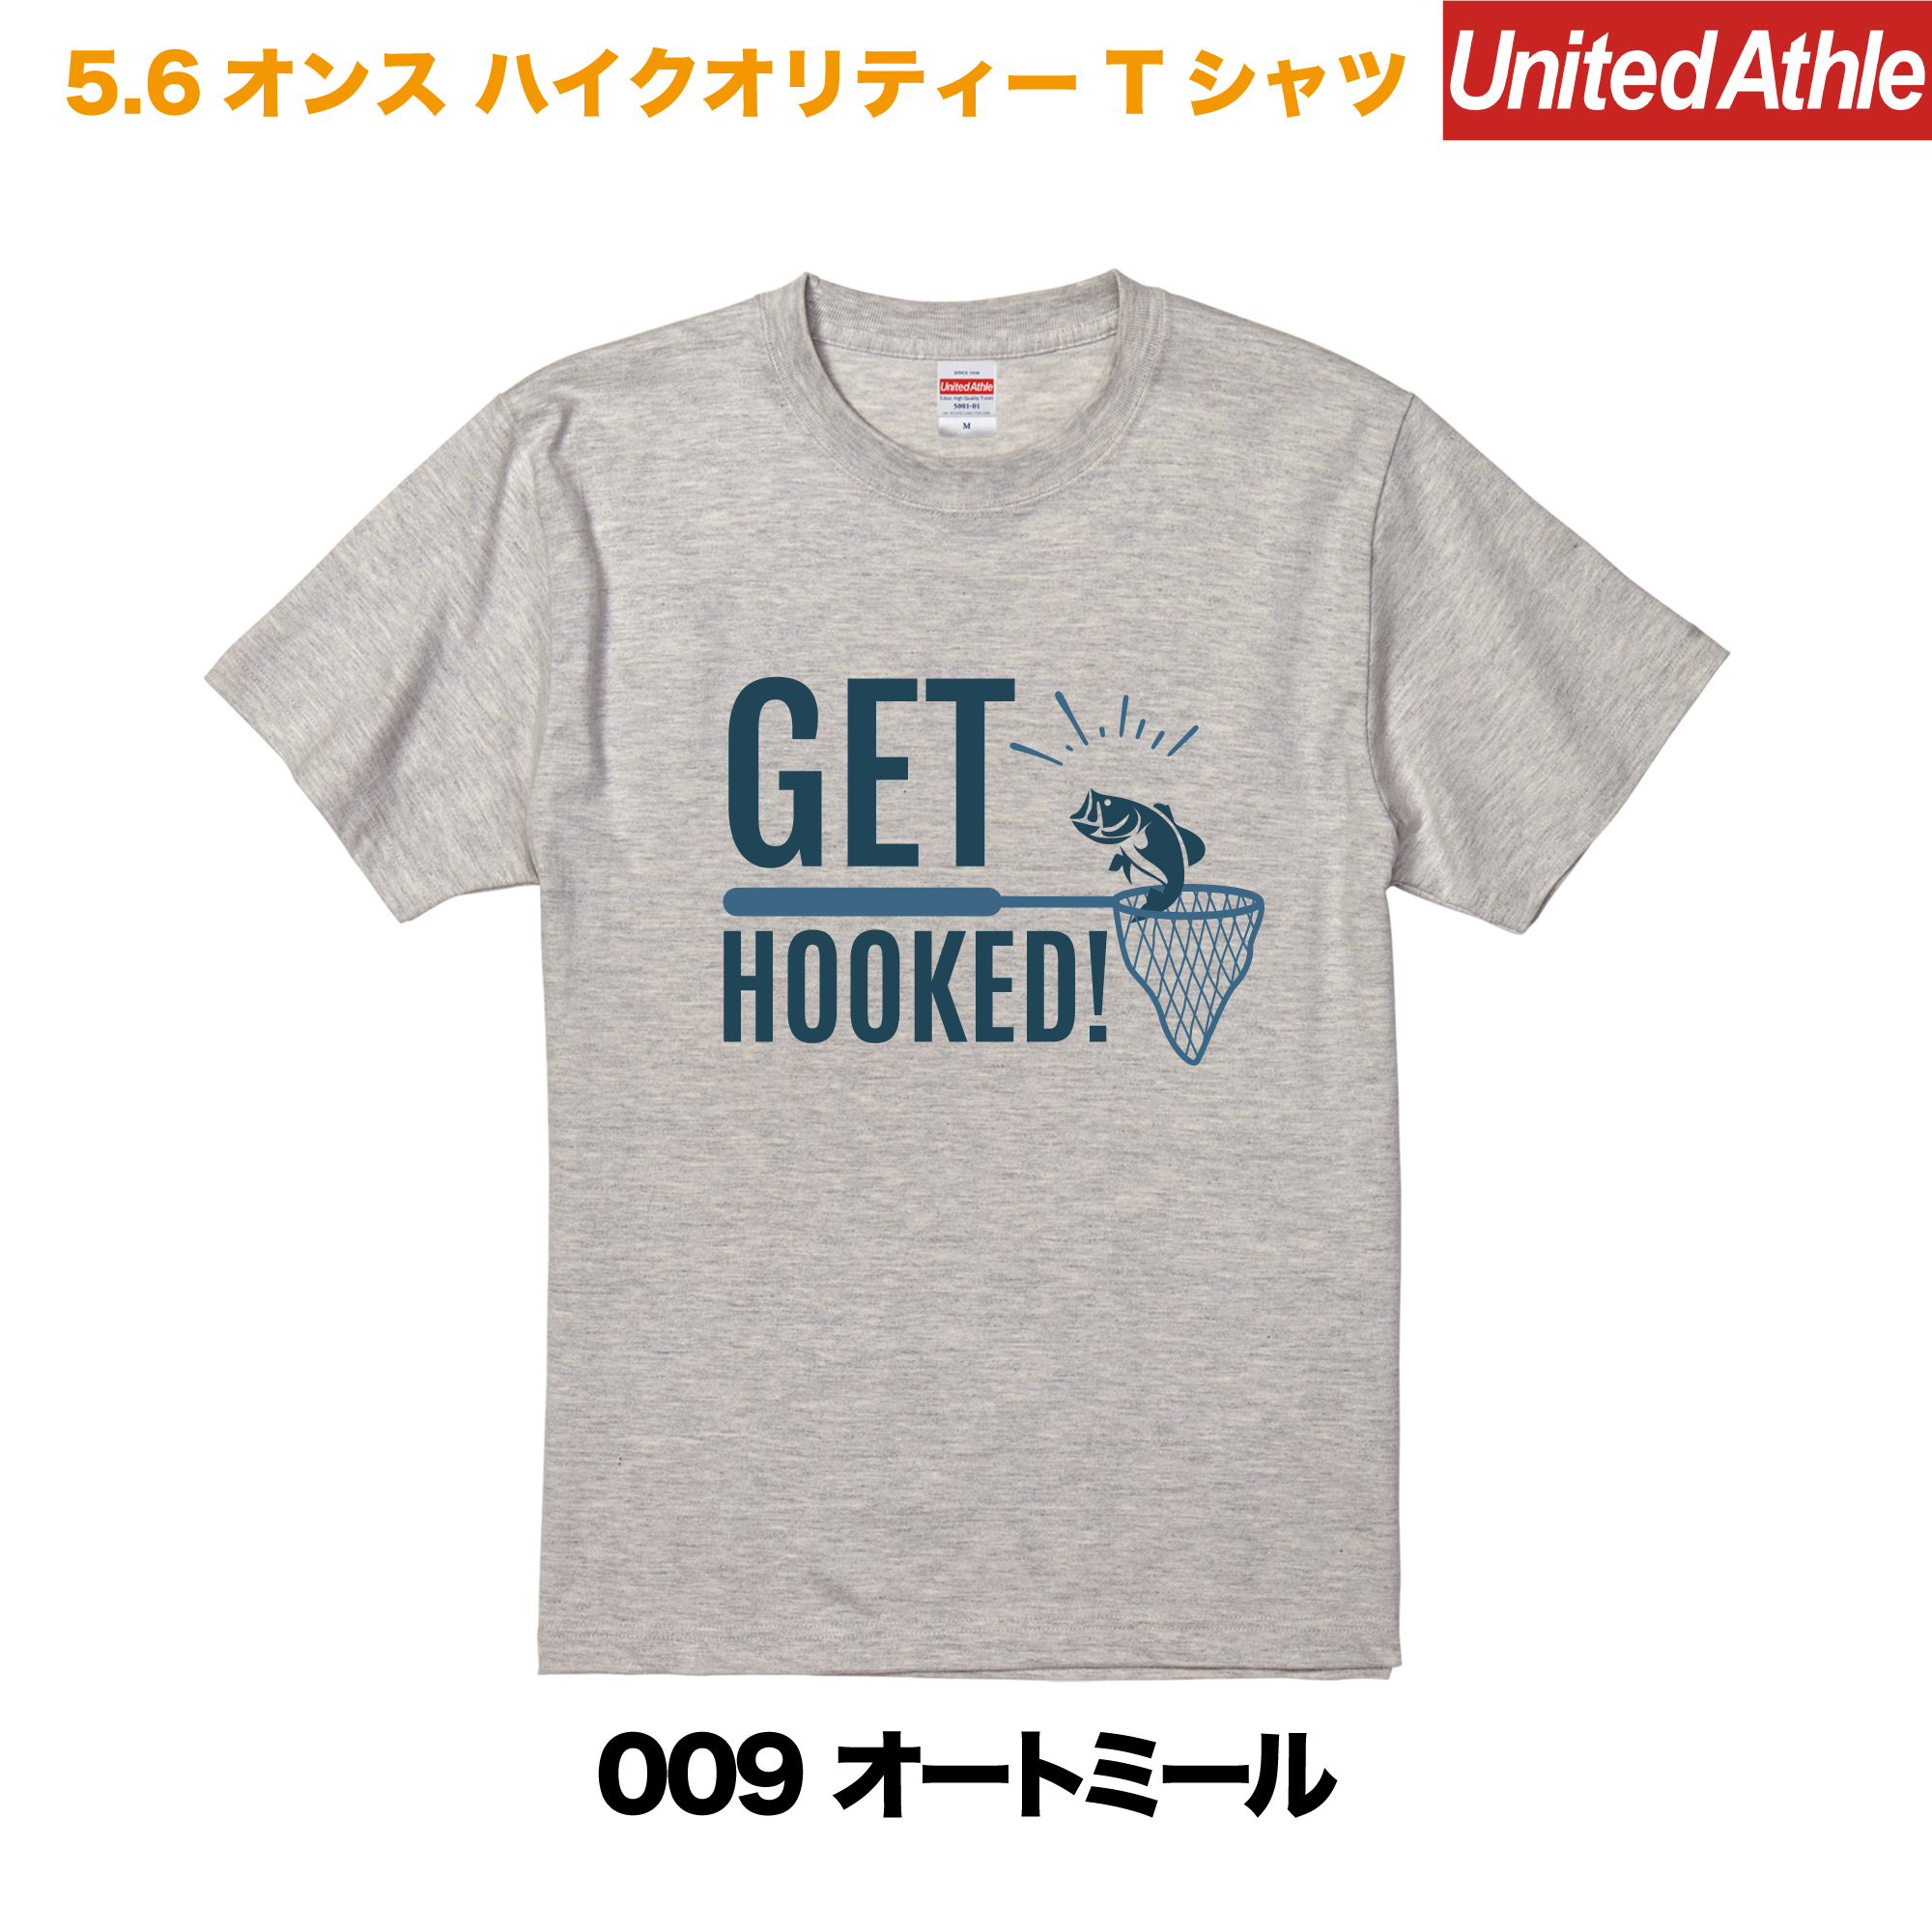 GET HOOKED　プリントTシャツ　5001-01【オートミール】＜アダルト＞